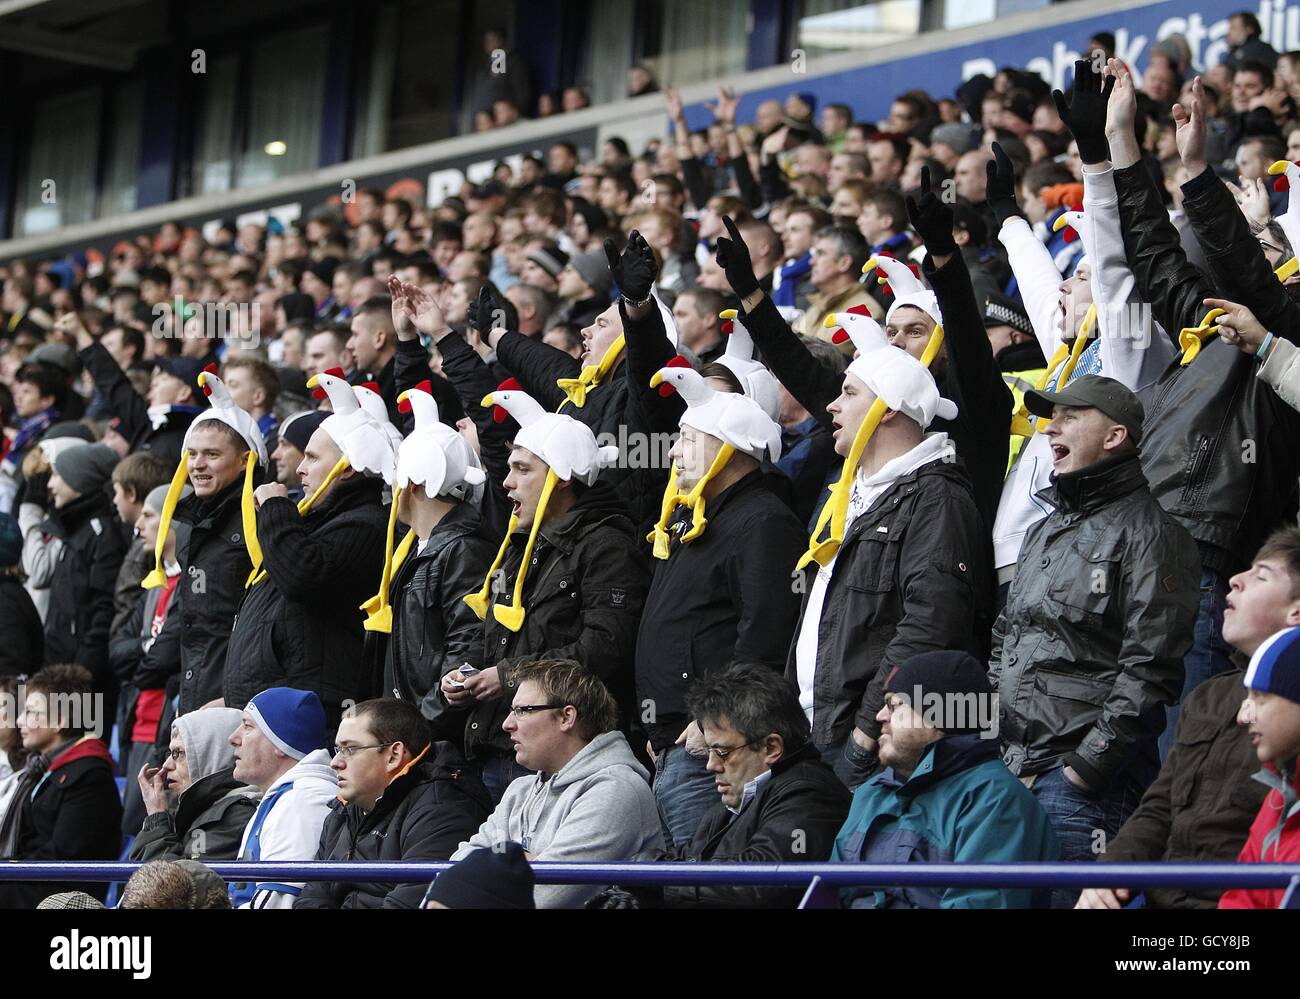 Soccer - Barclays Premier League - Bolton Wanderers v Blackburn Rovers - Reebok Stadium. Blackburn Rovers fans in the stands with comical hats Stock Photo